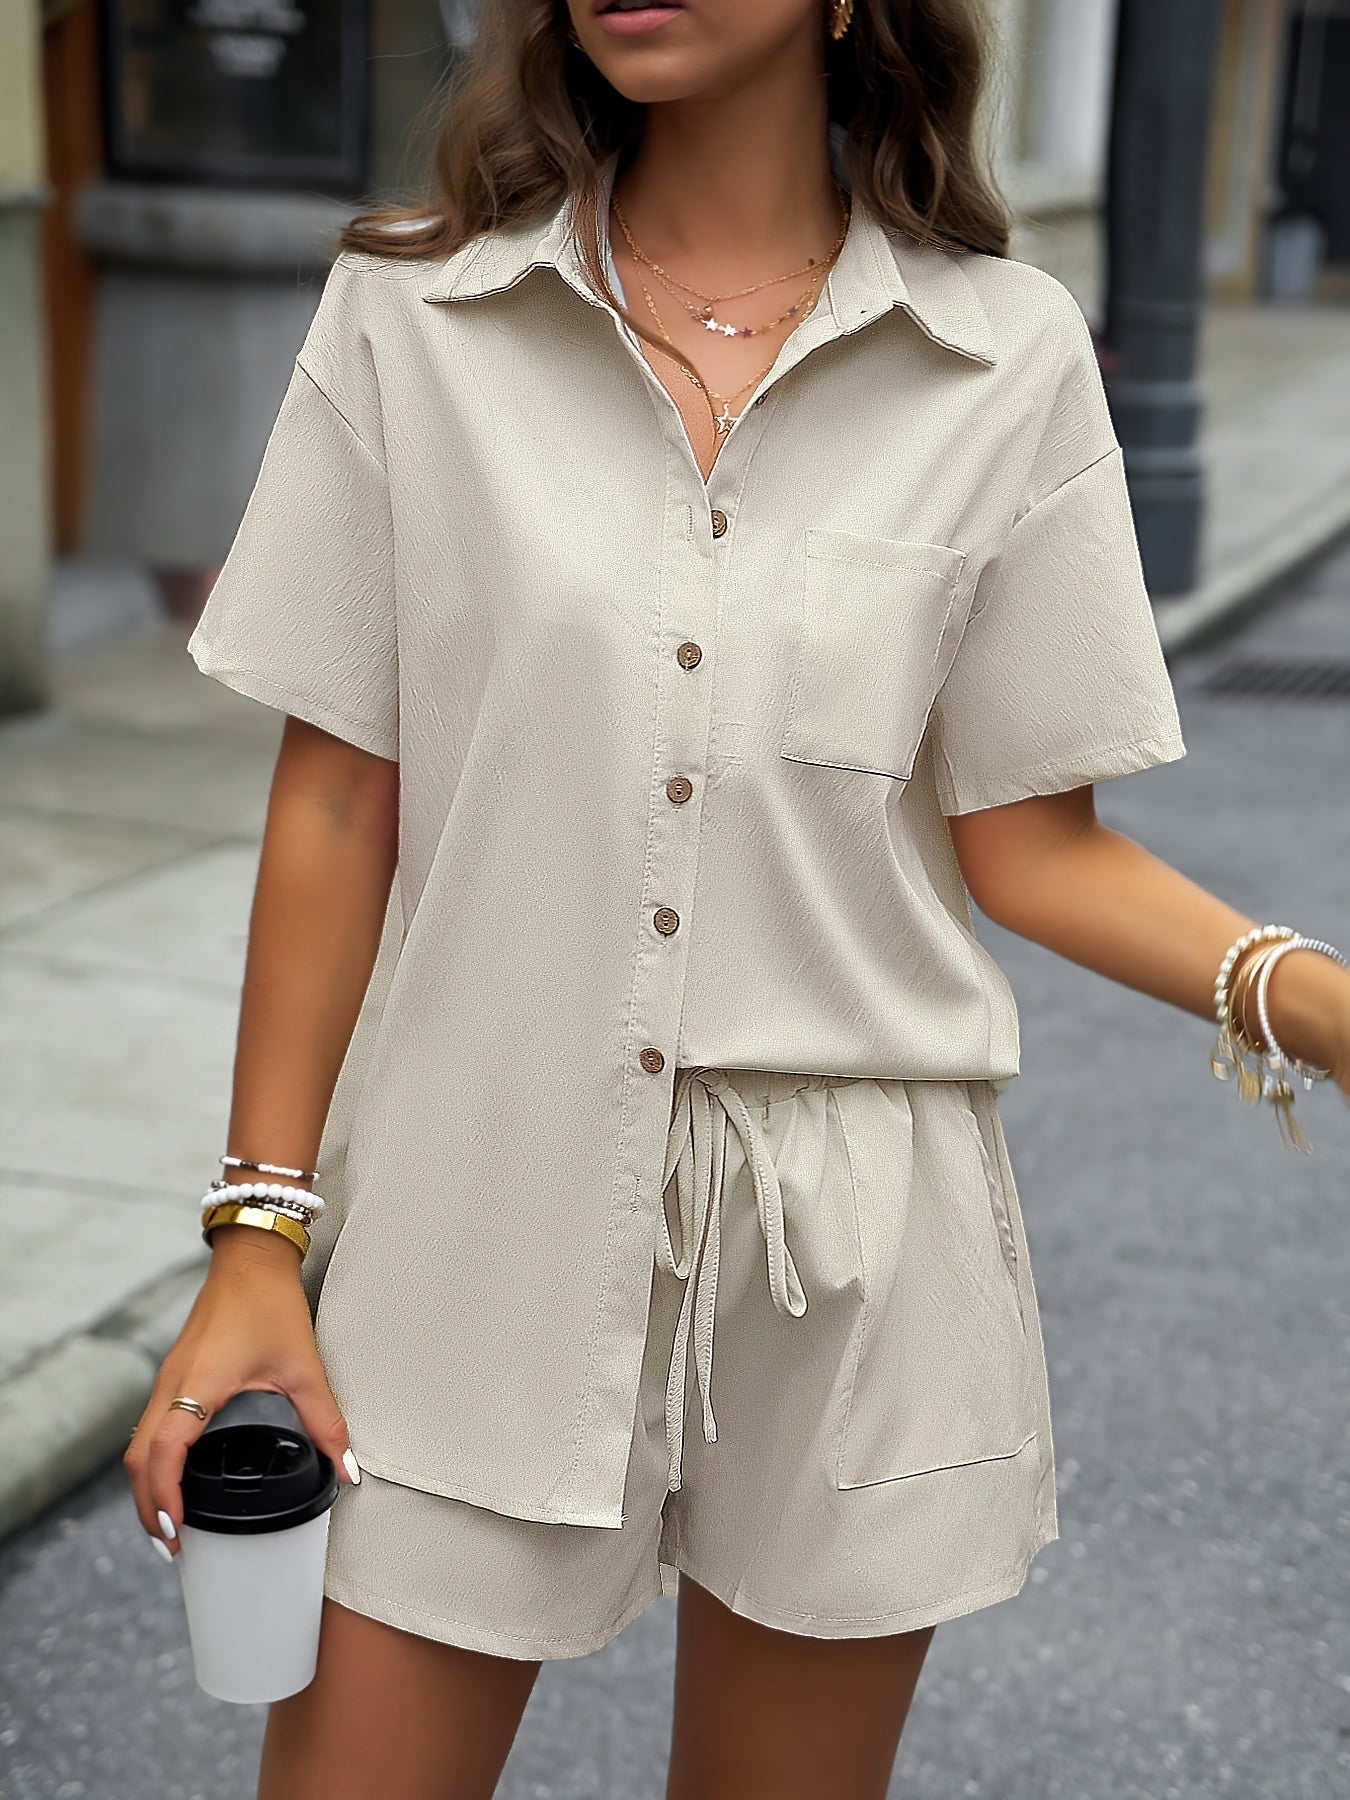 Solid Casual Two-piece Set, Button Front Turn Down Collar Mid Length Shirt & Drawstring Elastic Waist Shorts Outfits, Women's Clothing